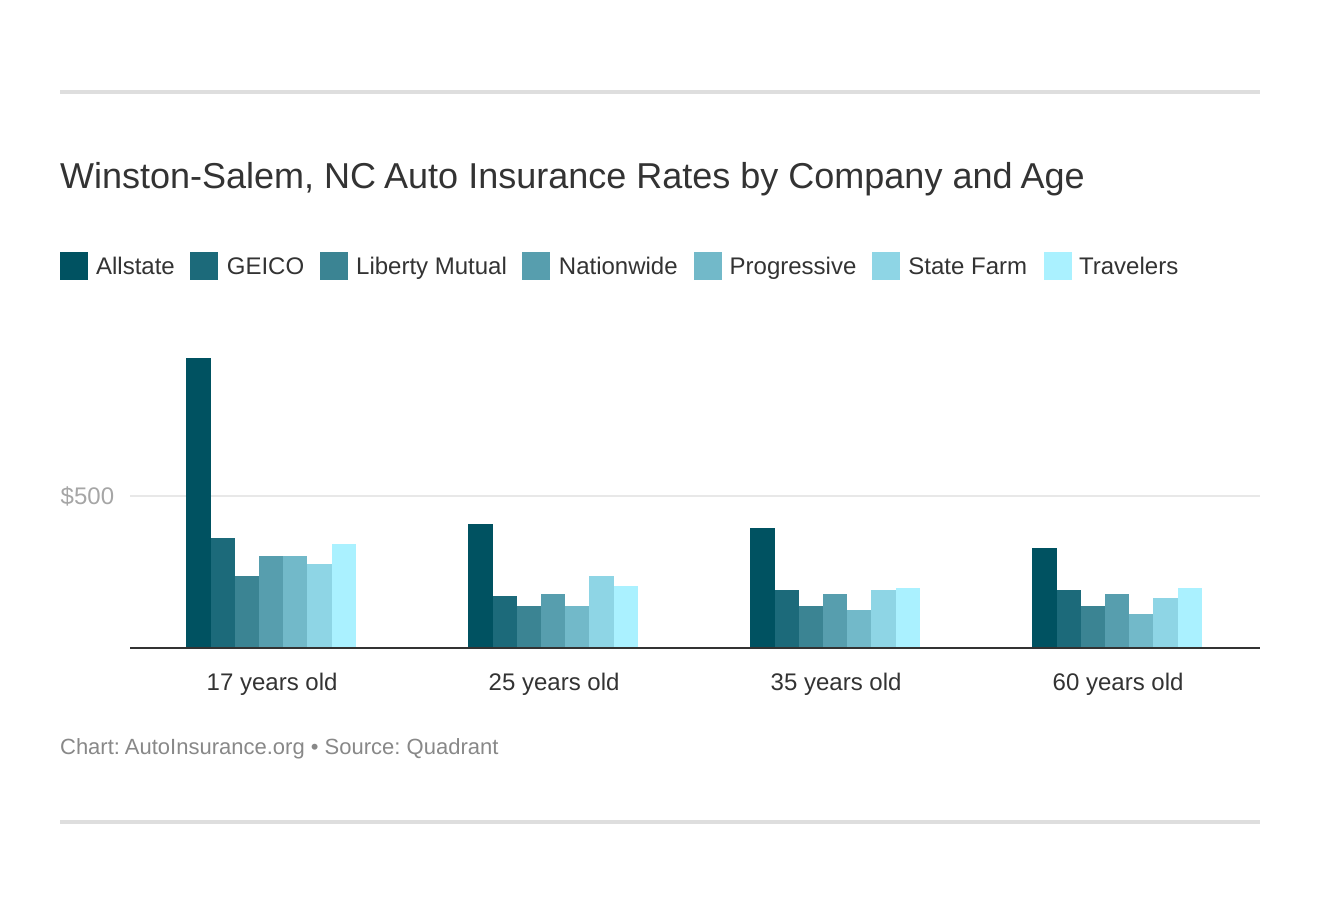 Winston-Salem, NC Auto Insurance Rates by Company and Age